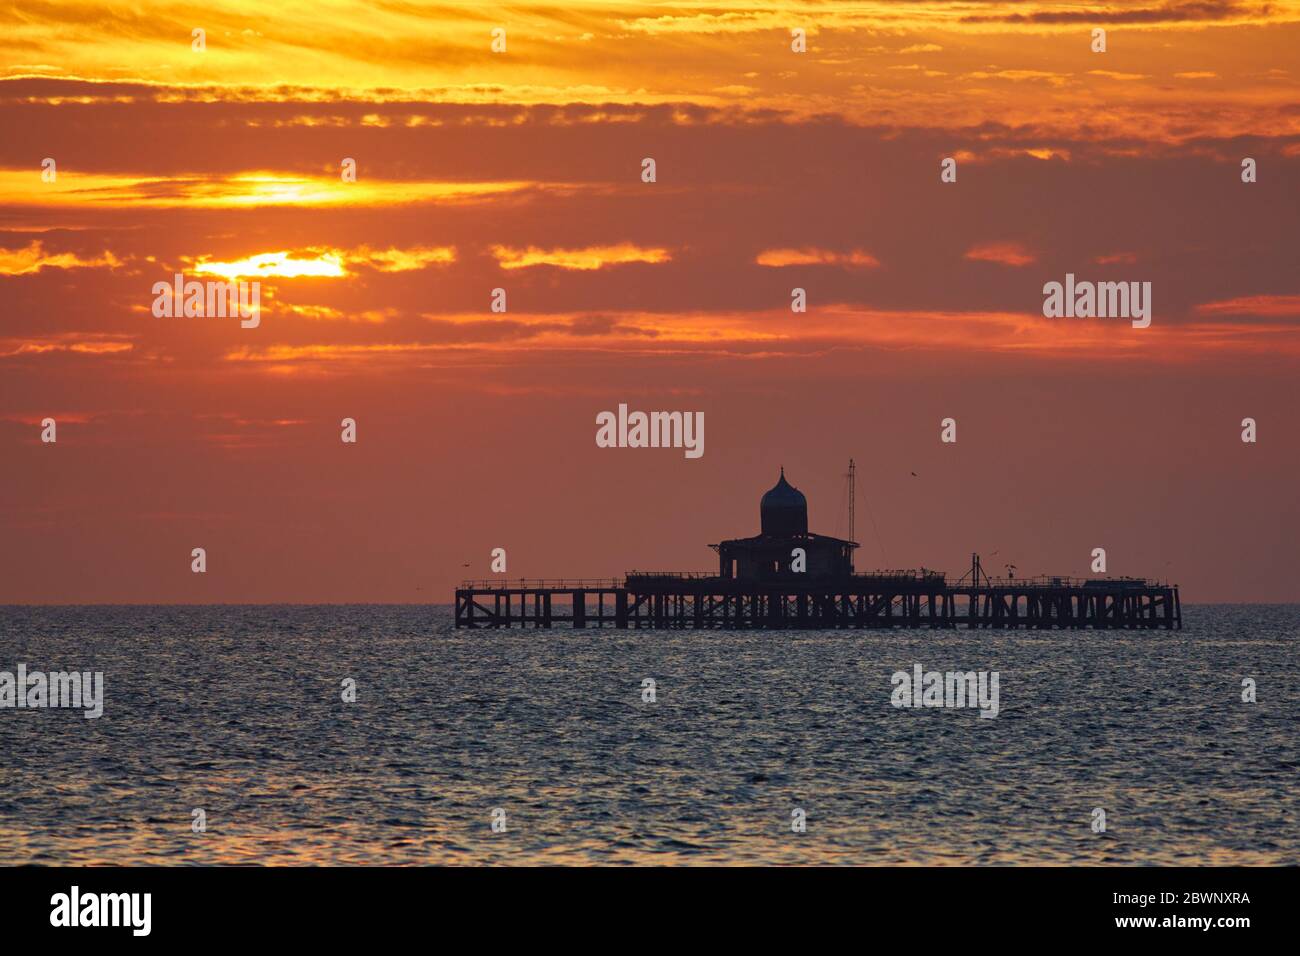 Herne Bay, Kent, UK. 2nd JUne 2020: UK Weather. Sunset at the abandoned old pier head at Herne Bay at the end of a glorious hot and sunny day. Credit: Alan Payton/Alamy Live News Stock Photo